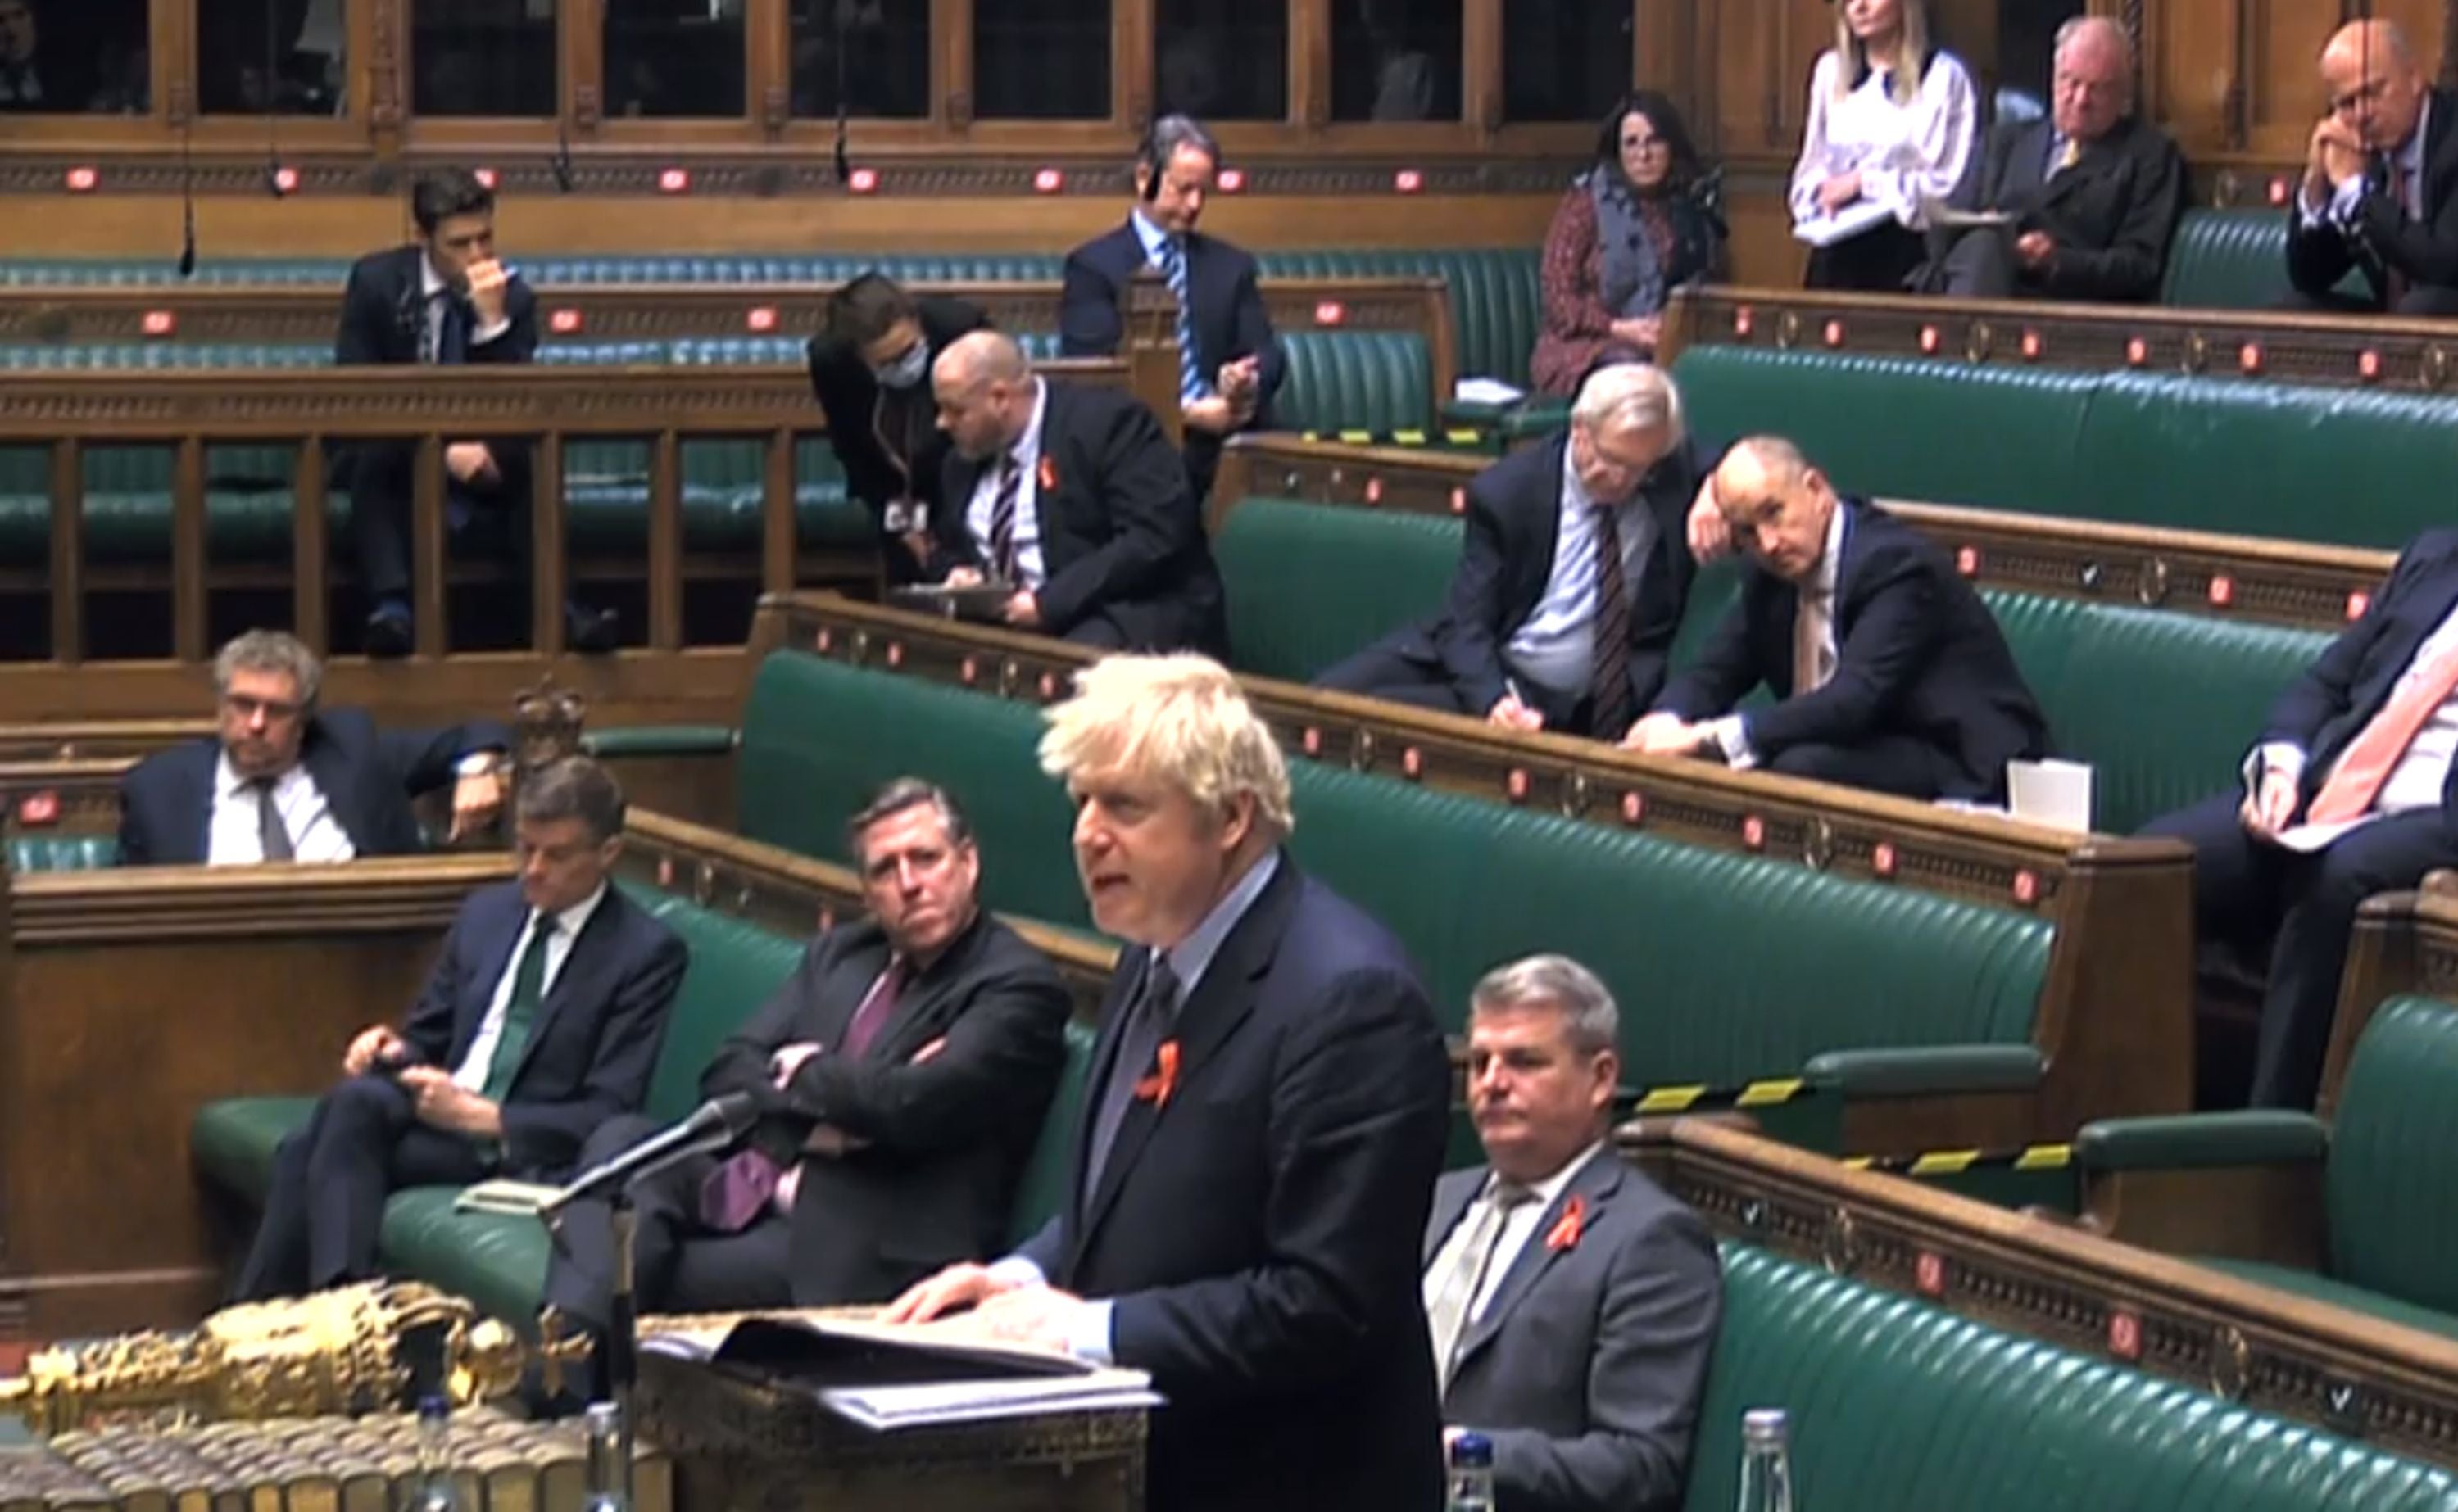 Boris Johnson was surrounded in the Commons by Tory MPs sceptical of his virus plans